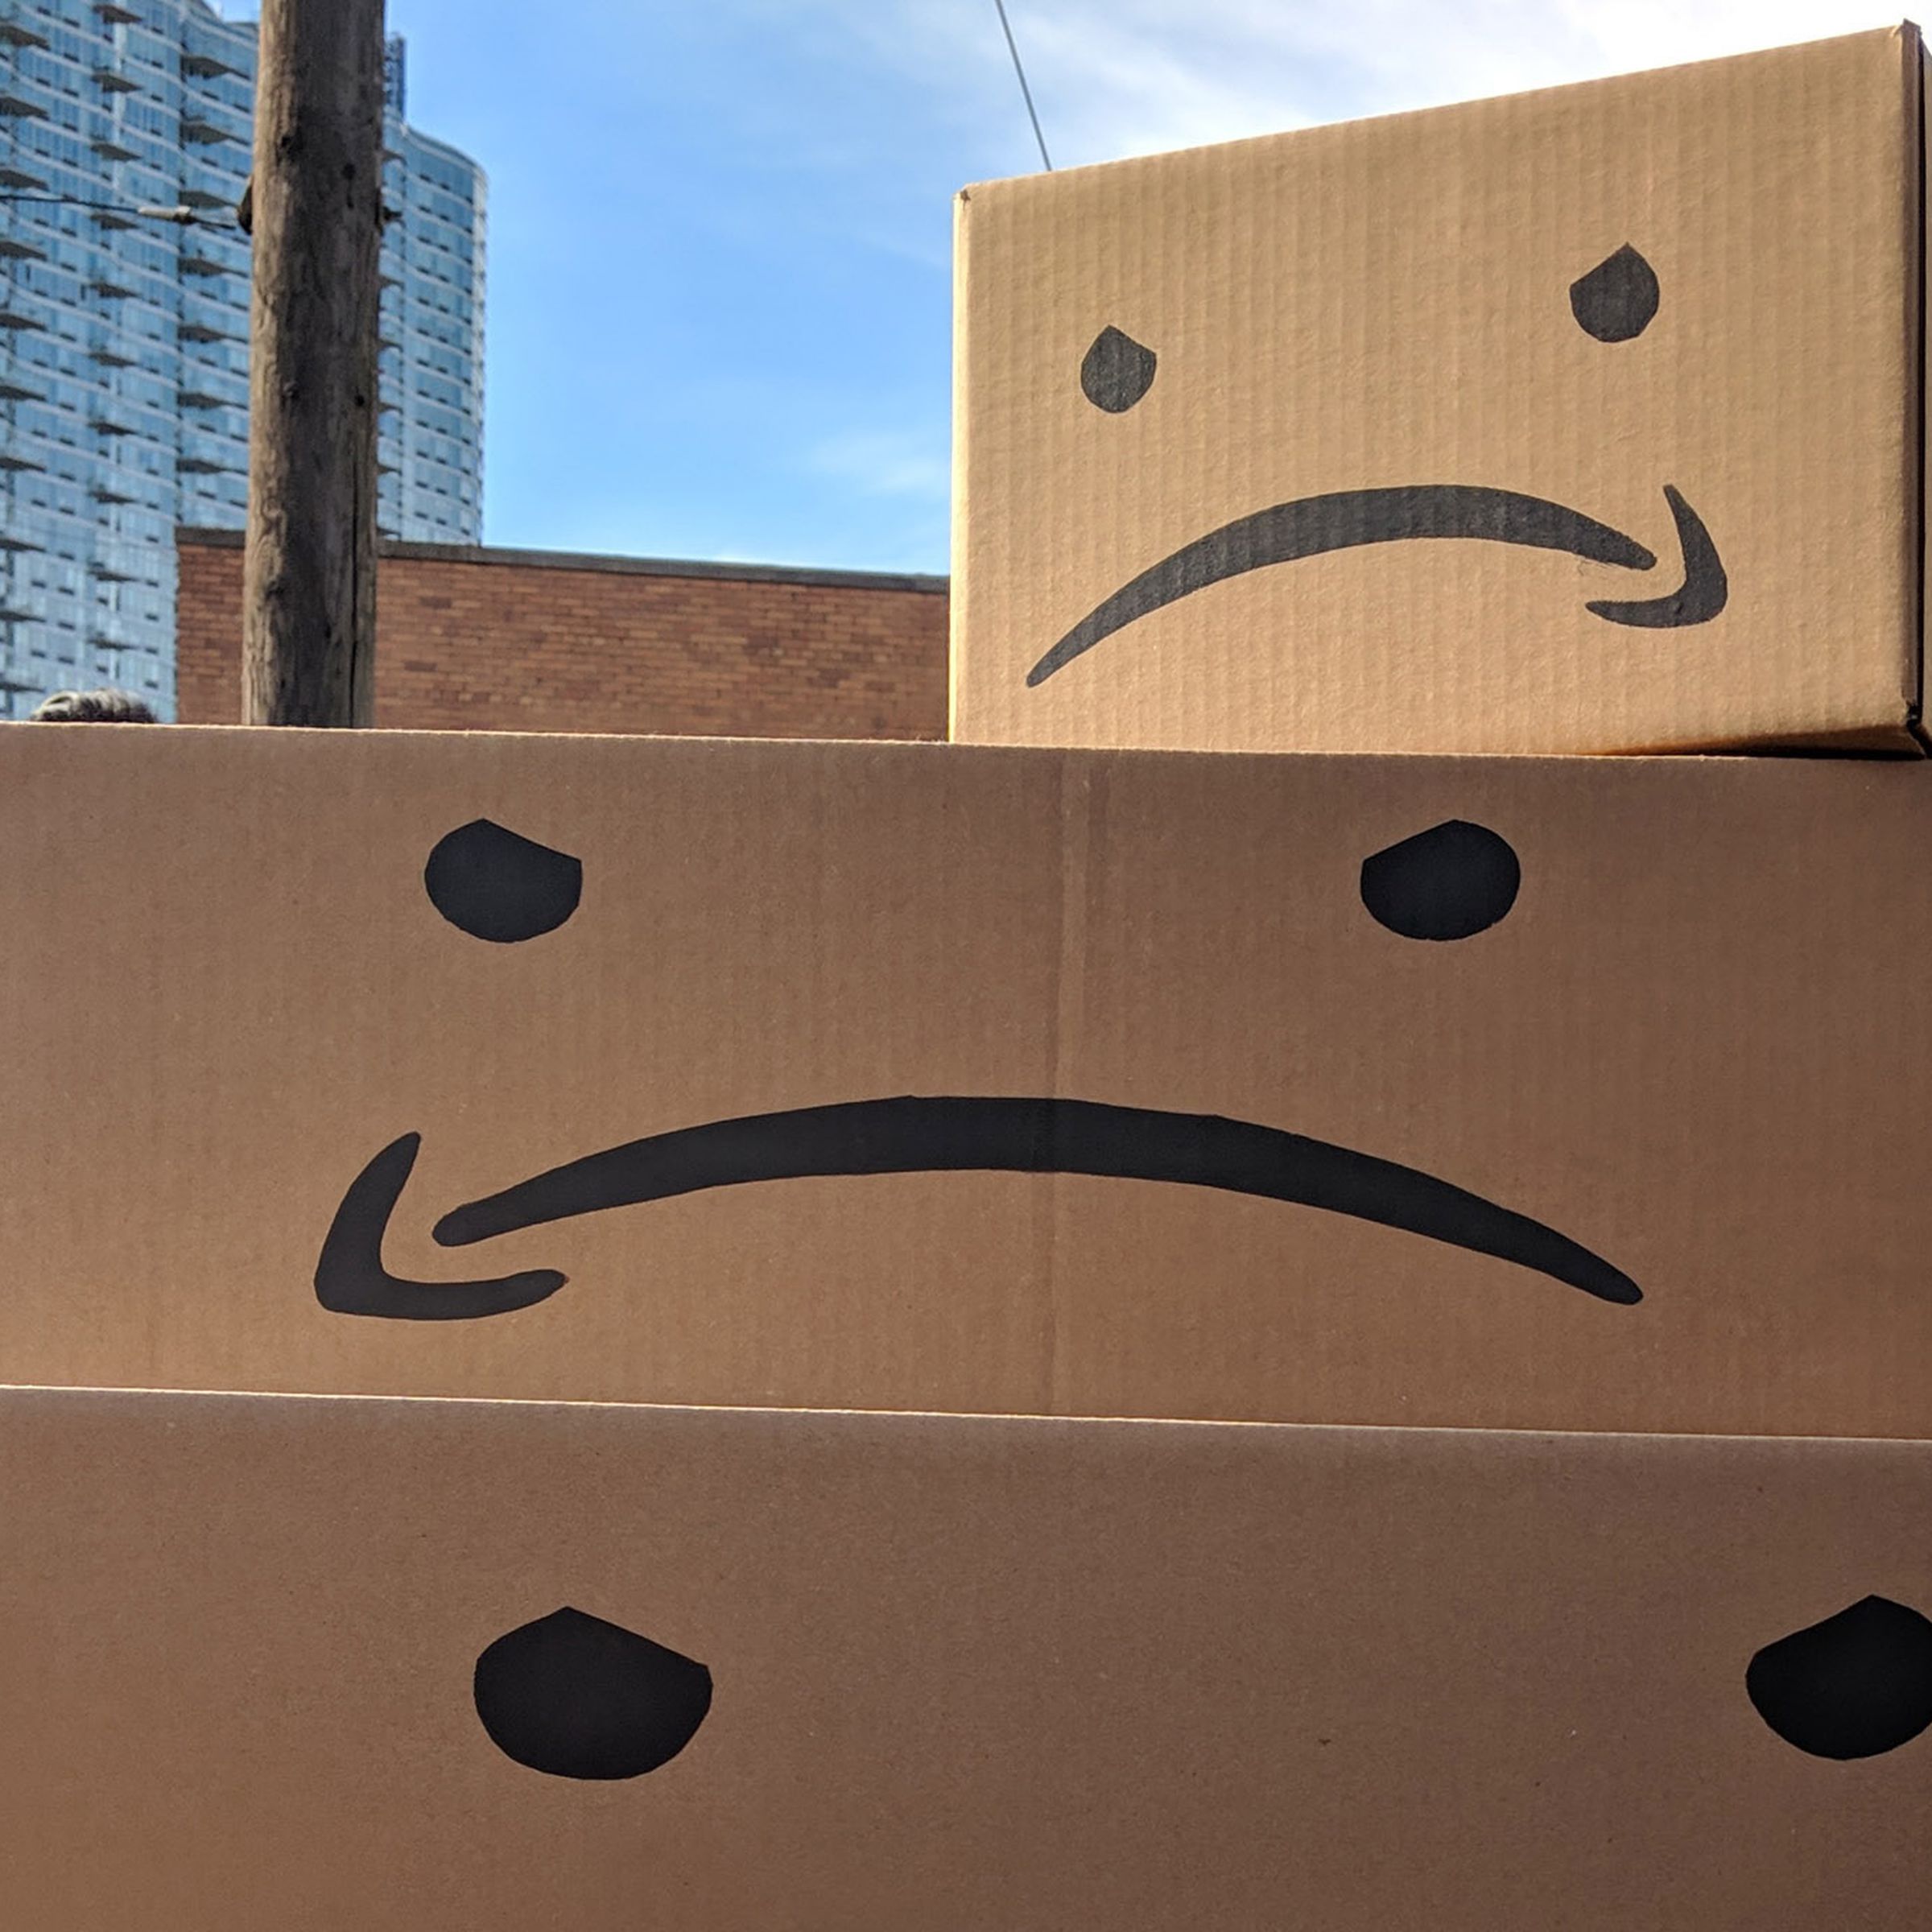 Image of three cardboard boxes stacked on top of each other, with frowning faces using an upside-down amazon logo for the mouth printed on them.